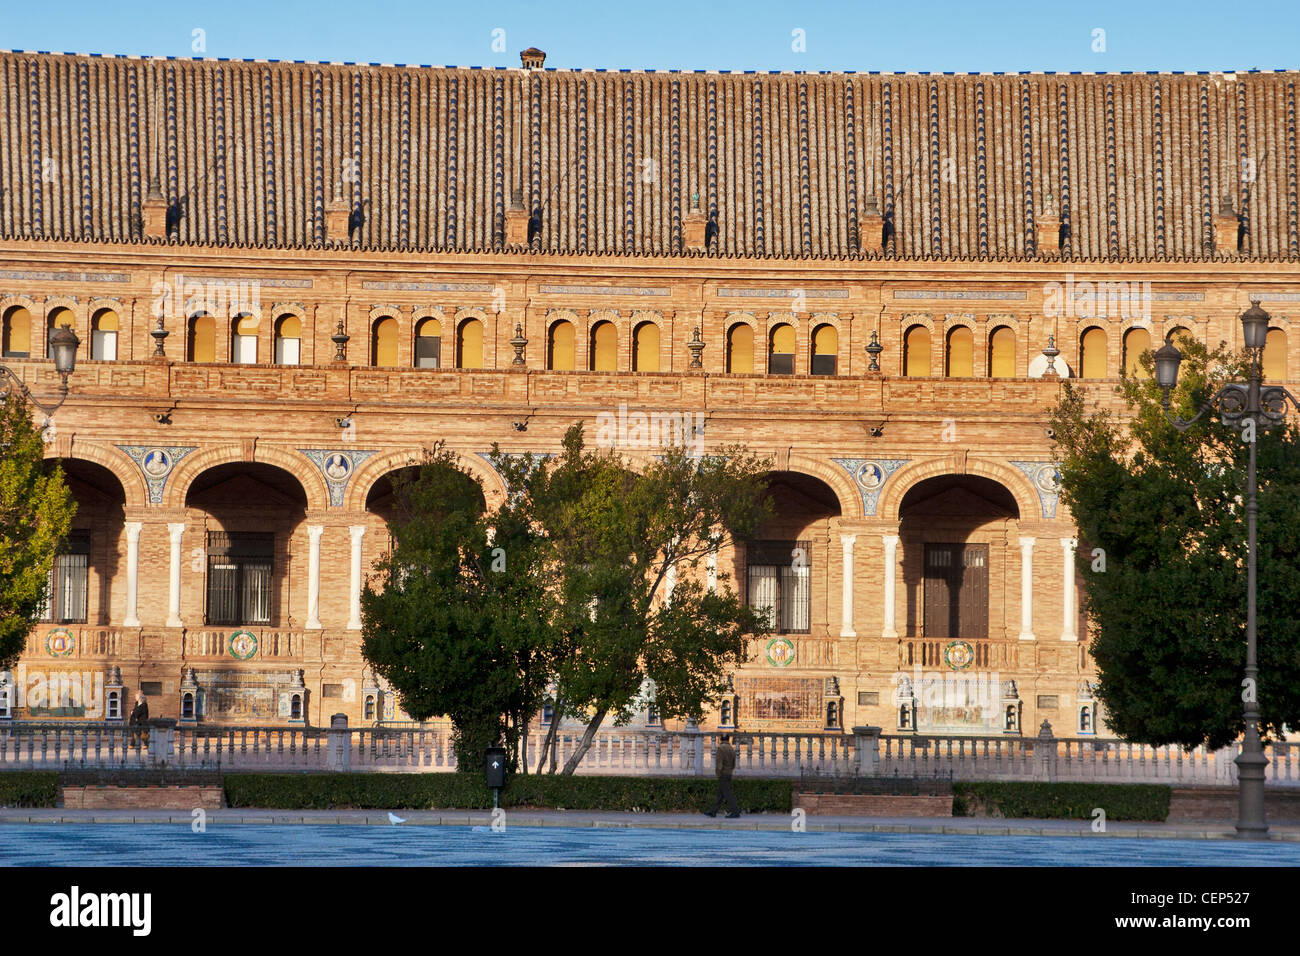 Spain, Seville, Plaza de Espana detail of colonnade and canal Stock Photo